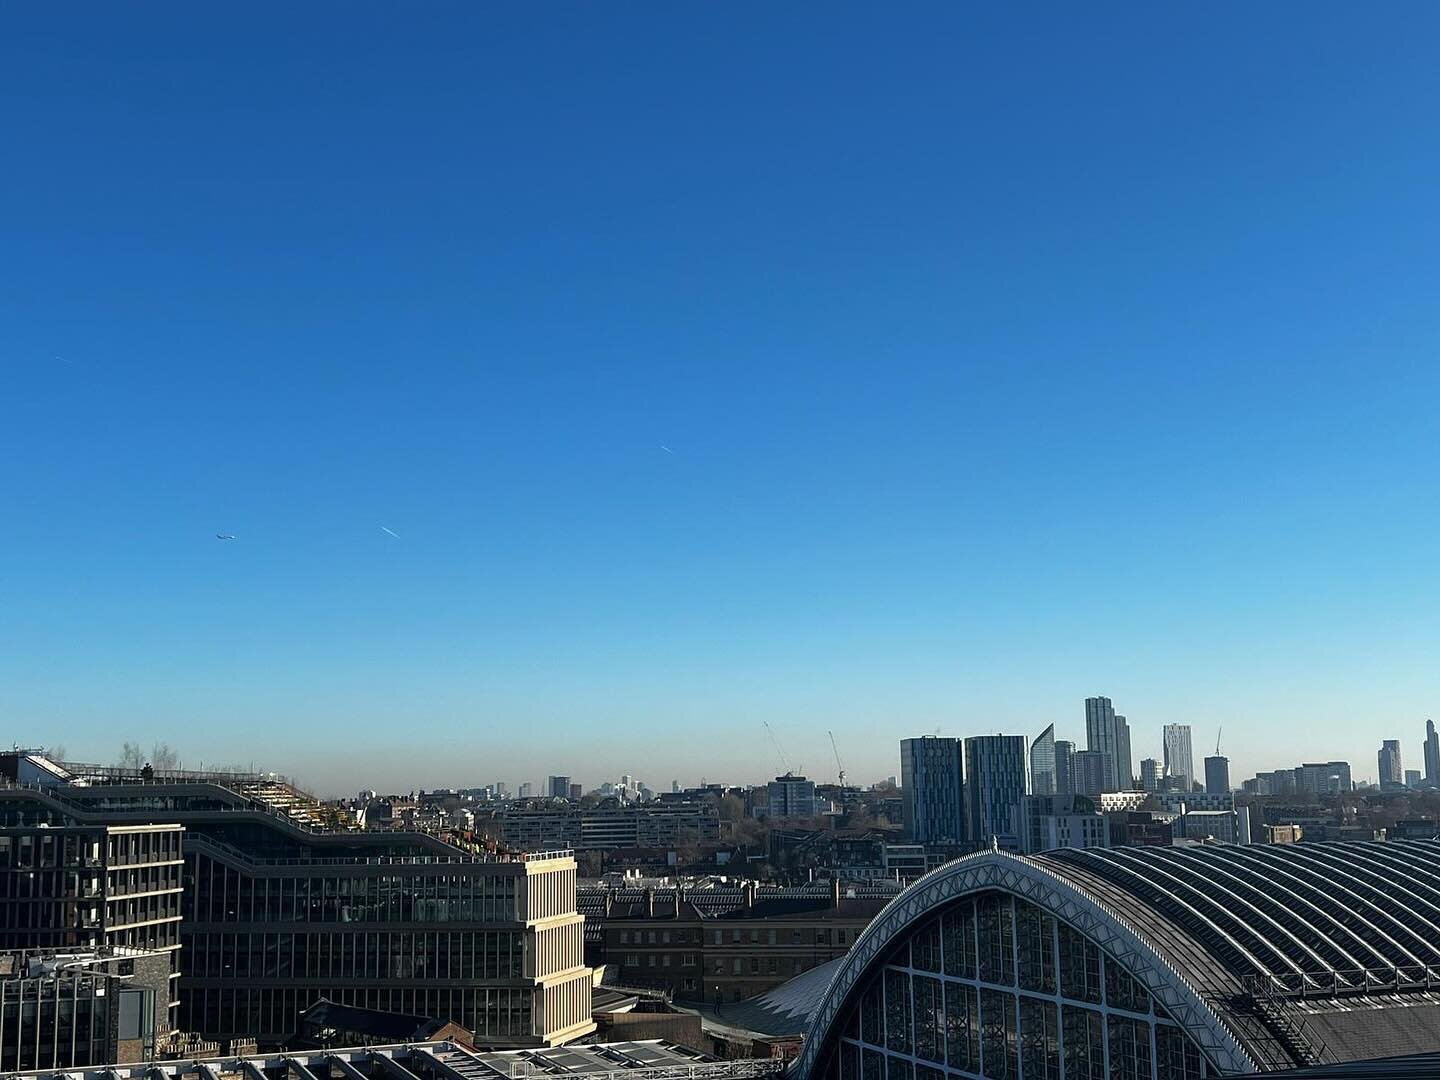 London morning views&hellip;what a day! #projectmanagement #consultant #constructionlife #london